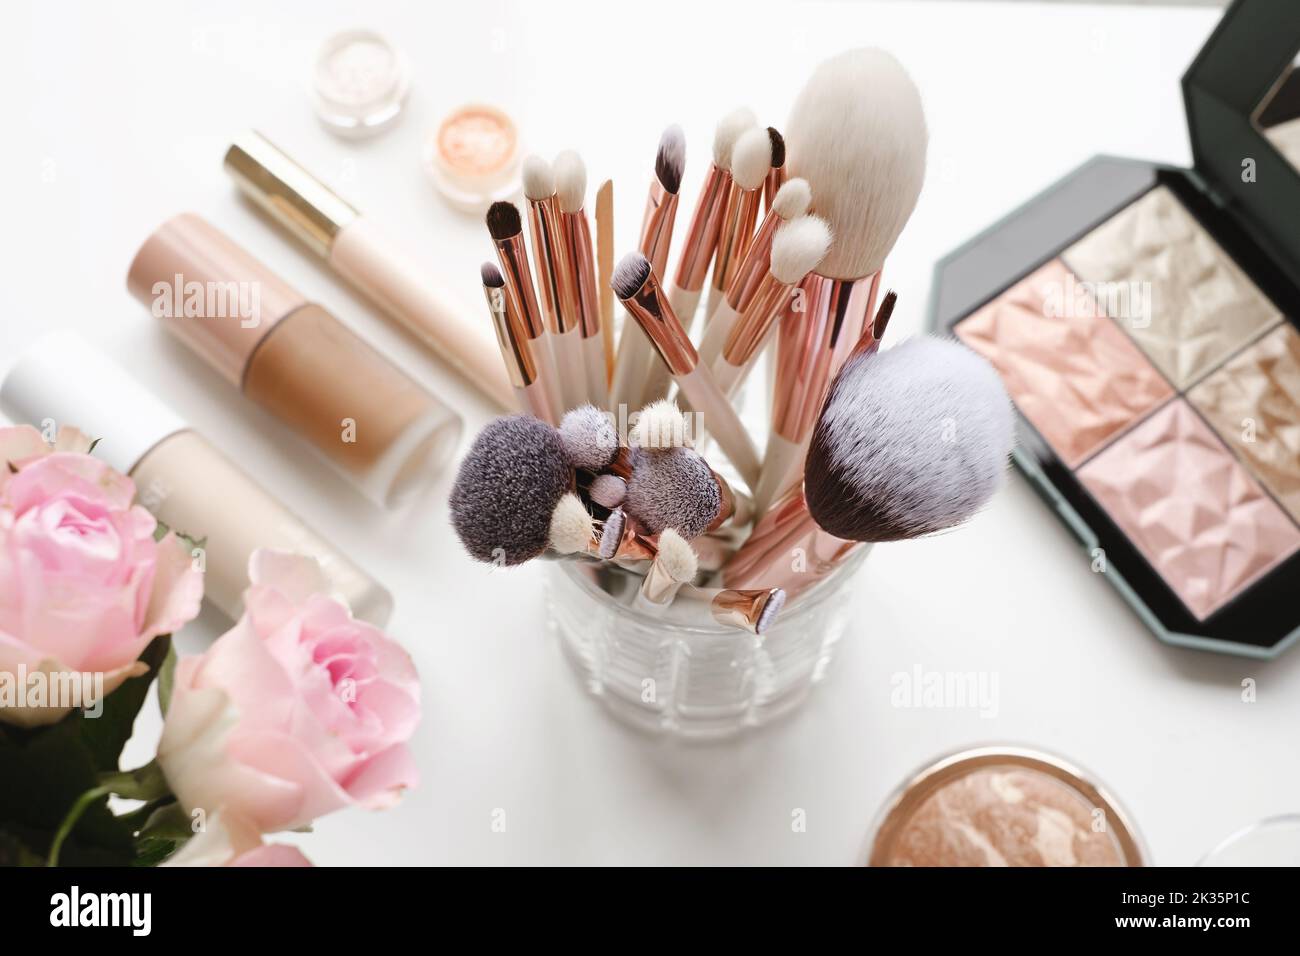 Professional makeup brushes and tools, make-up products set. Decorative cosmetics and makeup brushes on the table, top view on white. Flowers on Stock Photo